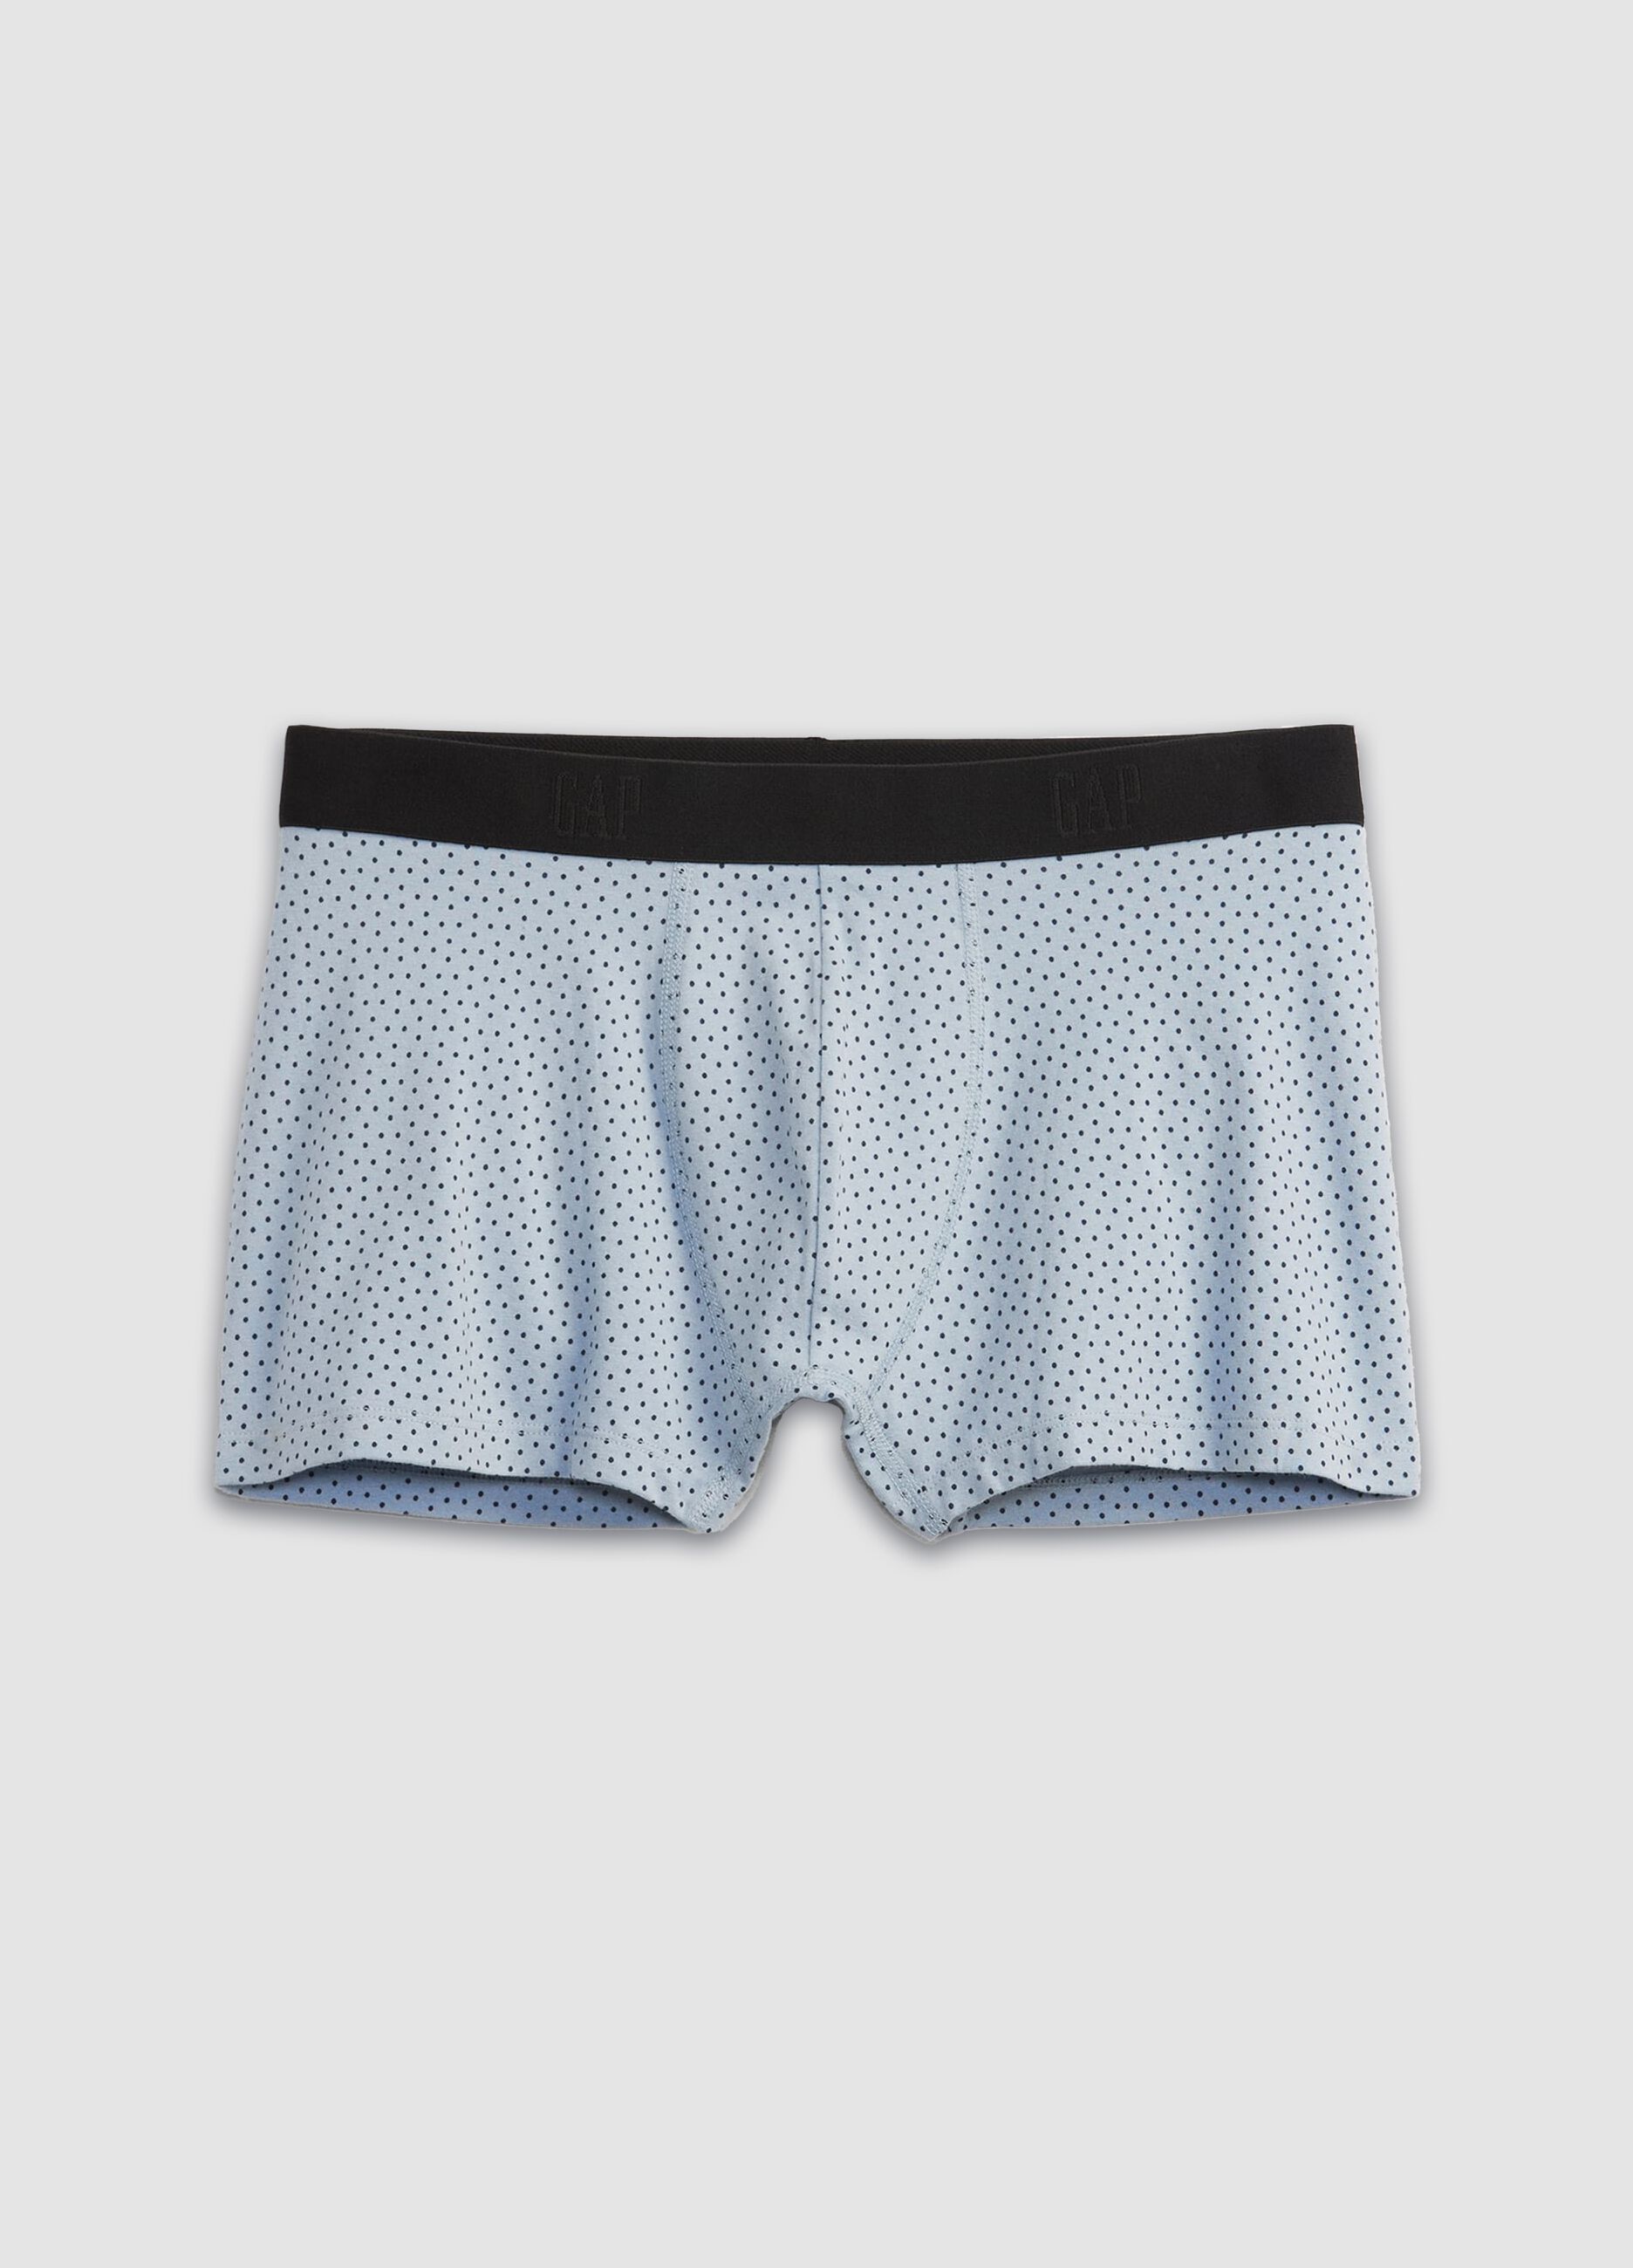 Boxer briefs with micro polka dot pattern._0